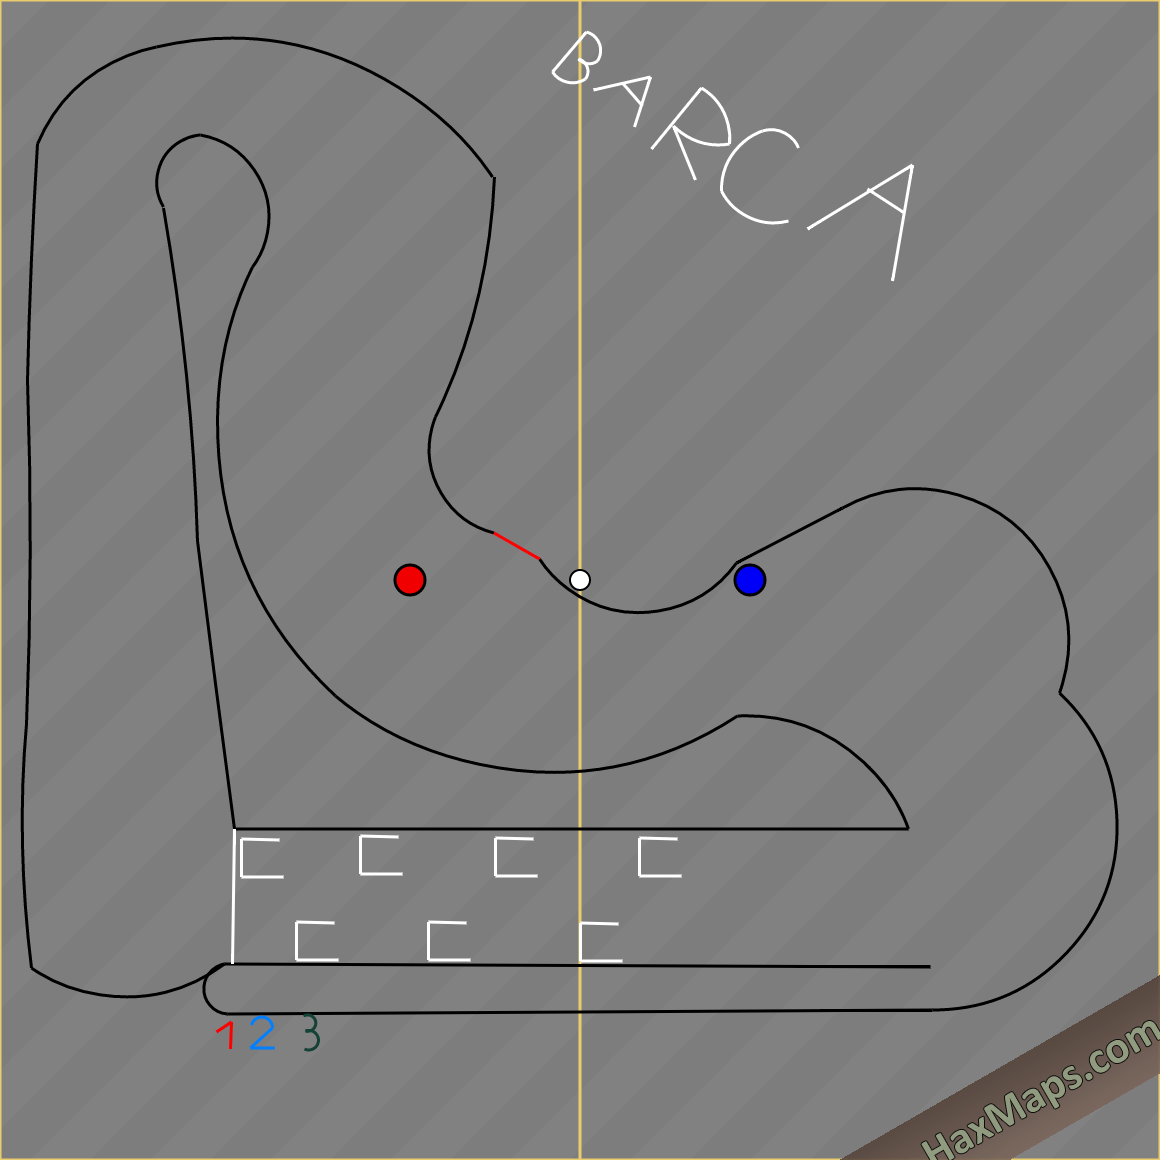 hax ball maps | Racing By Markothebest123